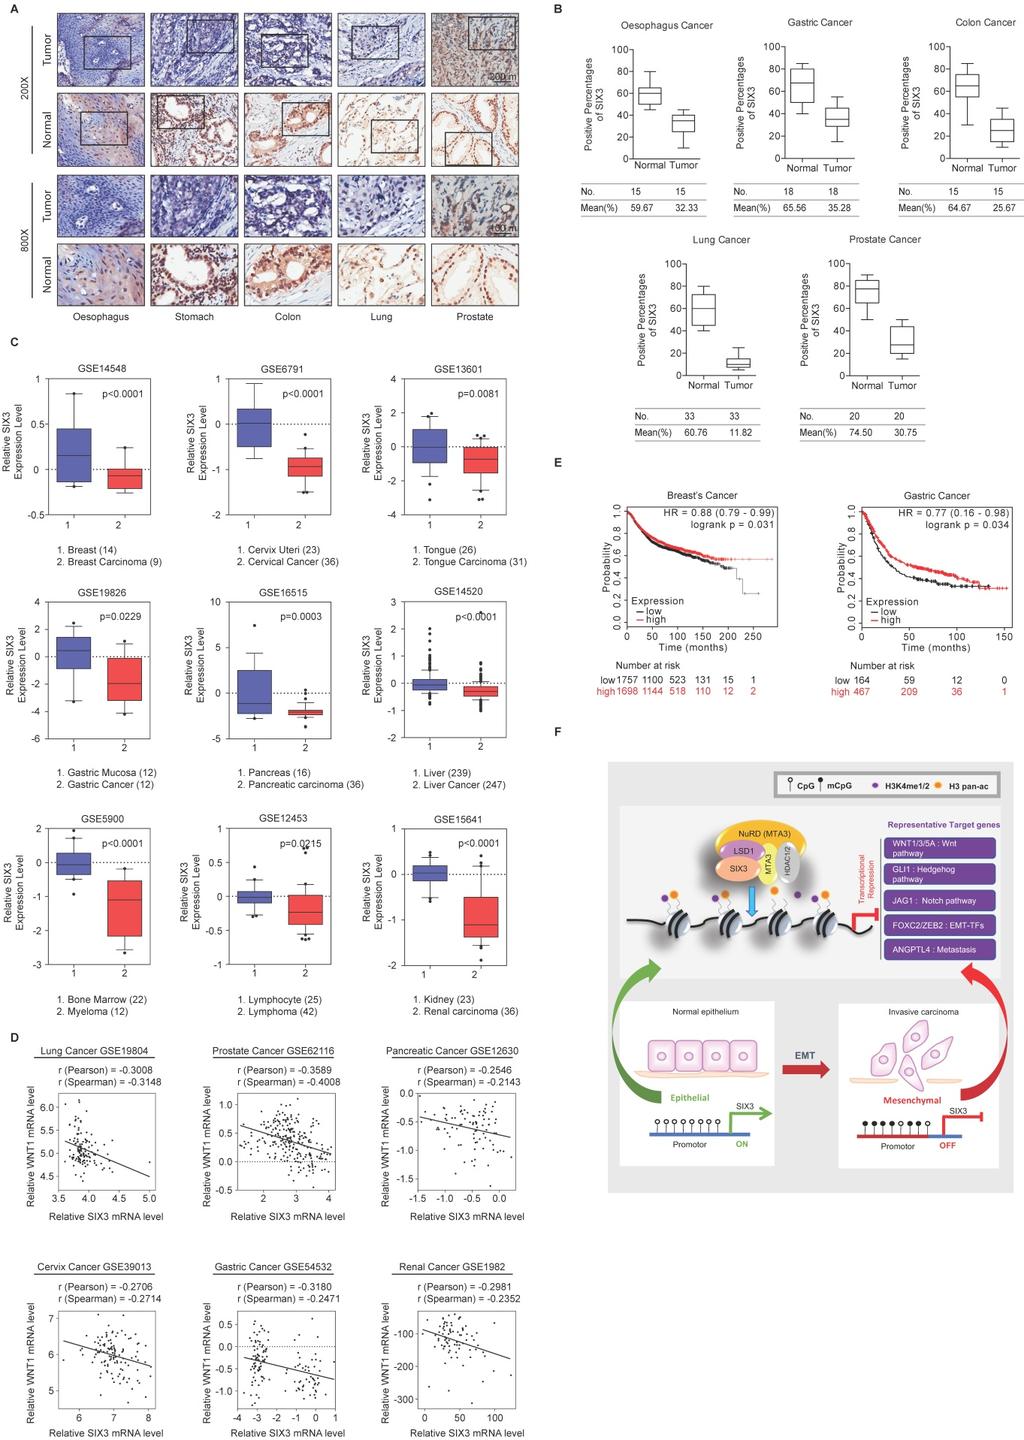 987 Figure 7. SIX3 is Downregulated in Multiple Carcinomas and Positively Correlated with Better Prognosis (A, B) SIX3 is downregulated in multiple carcinomas.